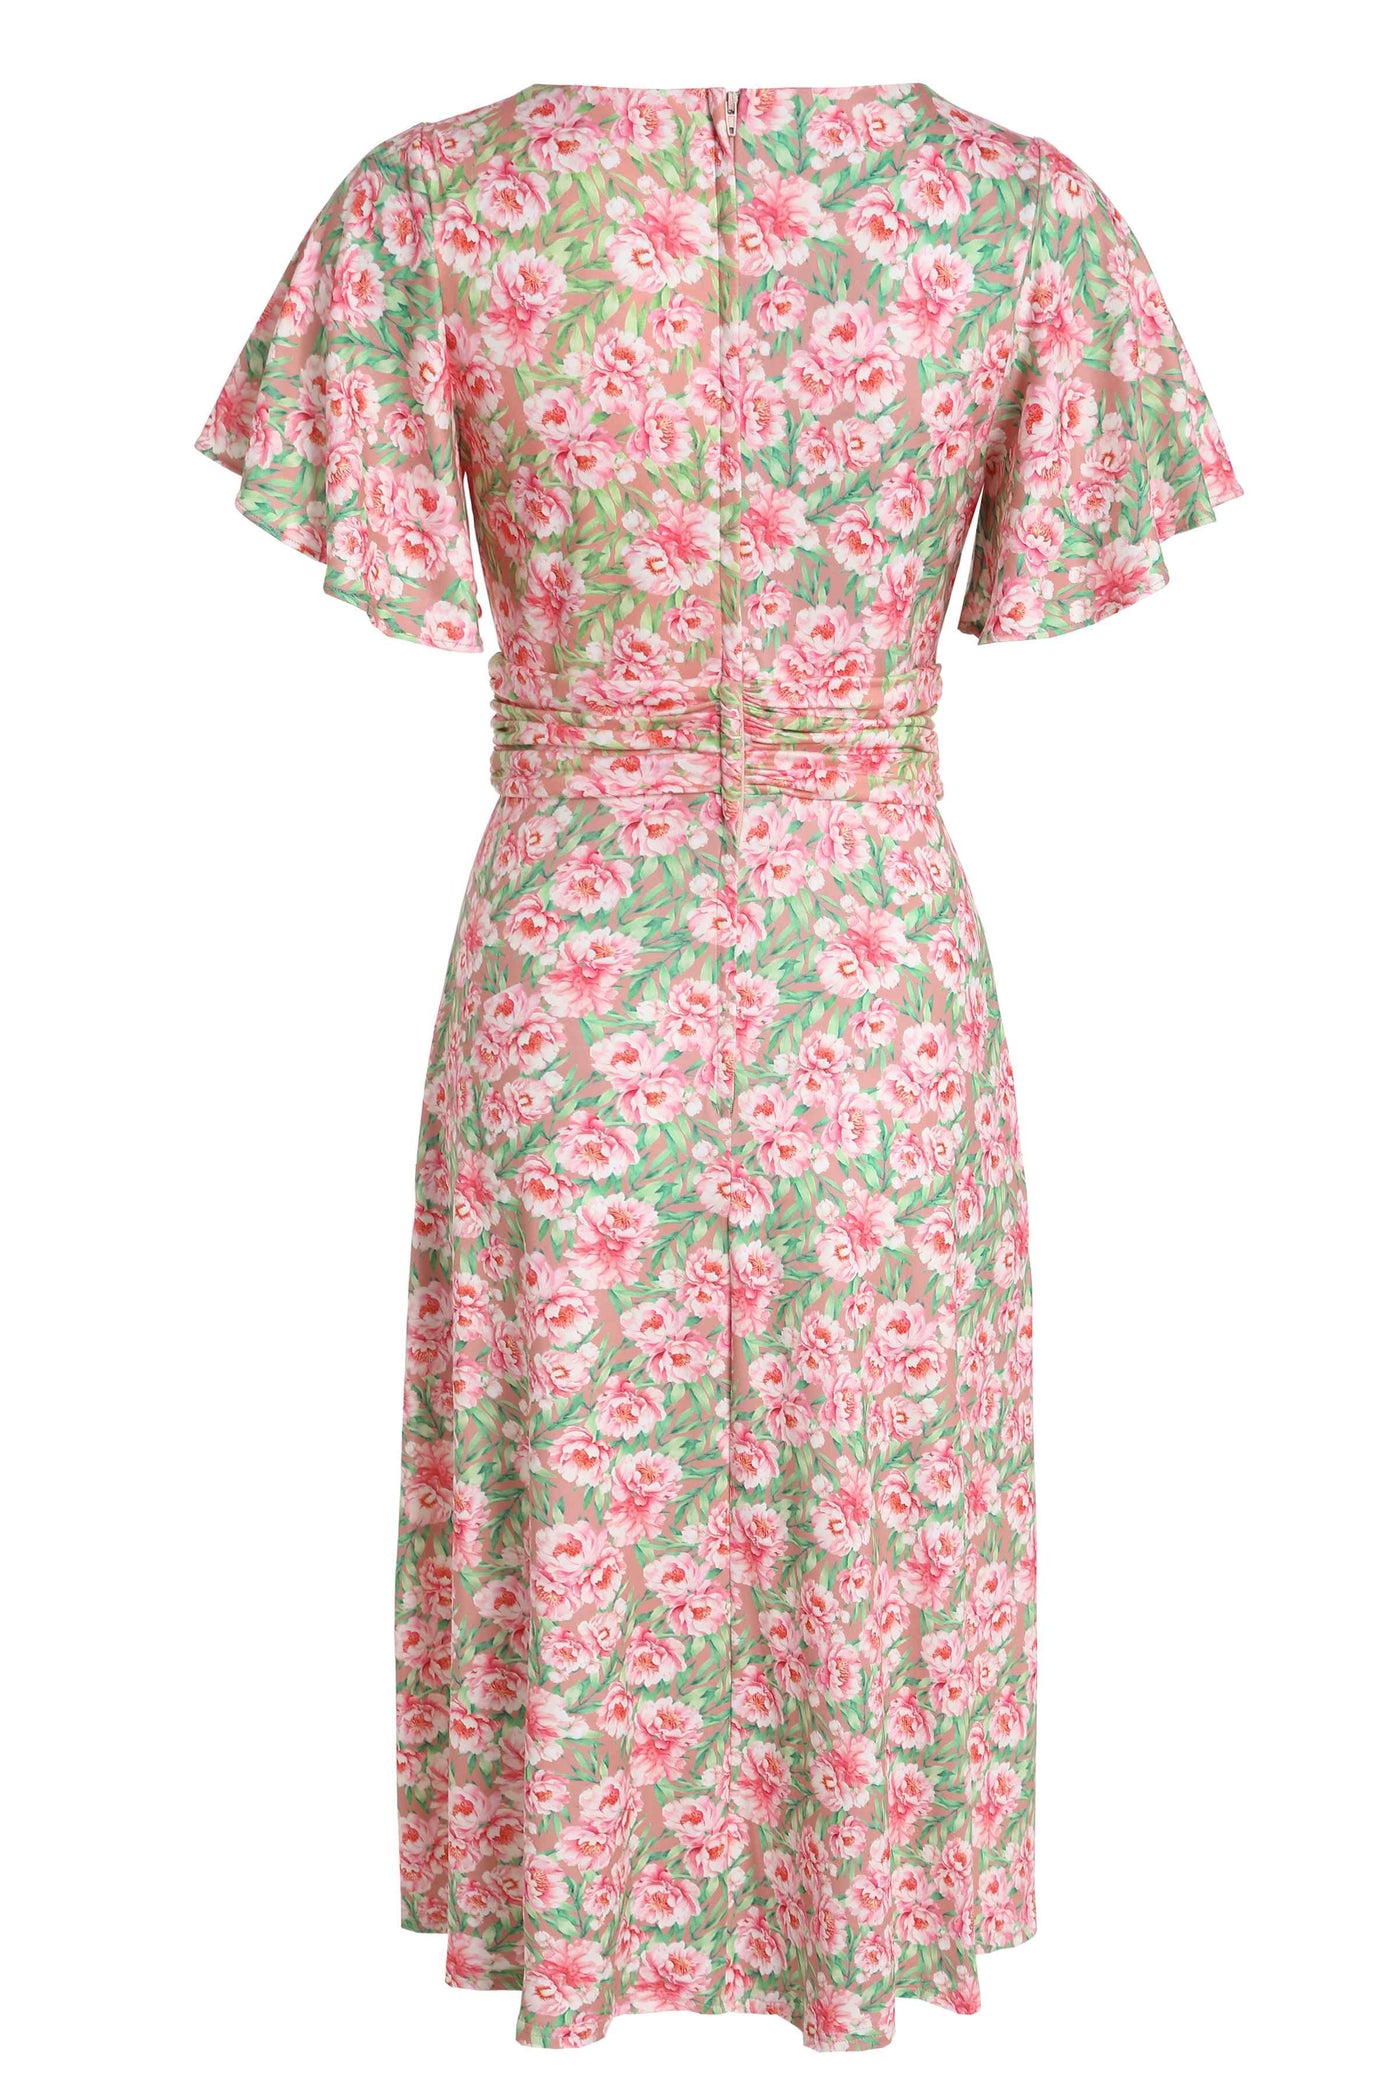 Back View of Pink Floral Casual Short Sleeved Dress